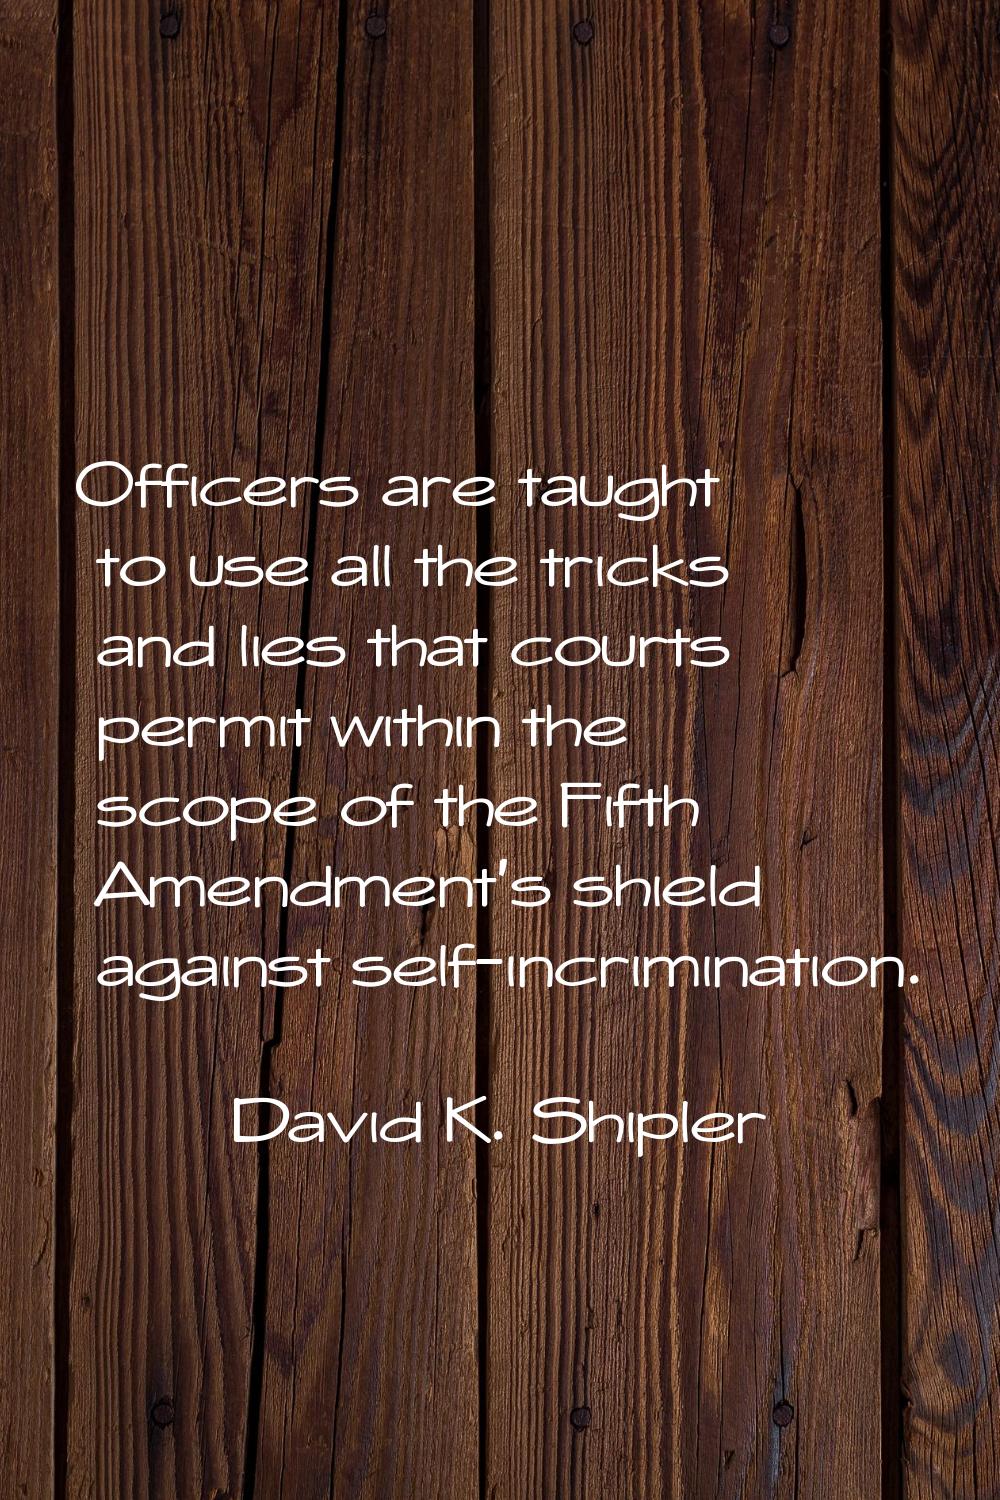 Officers are taught to use all the tricks and lies that courts permit within the scope of the Fifth